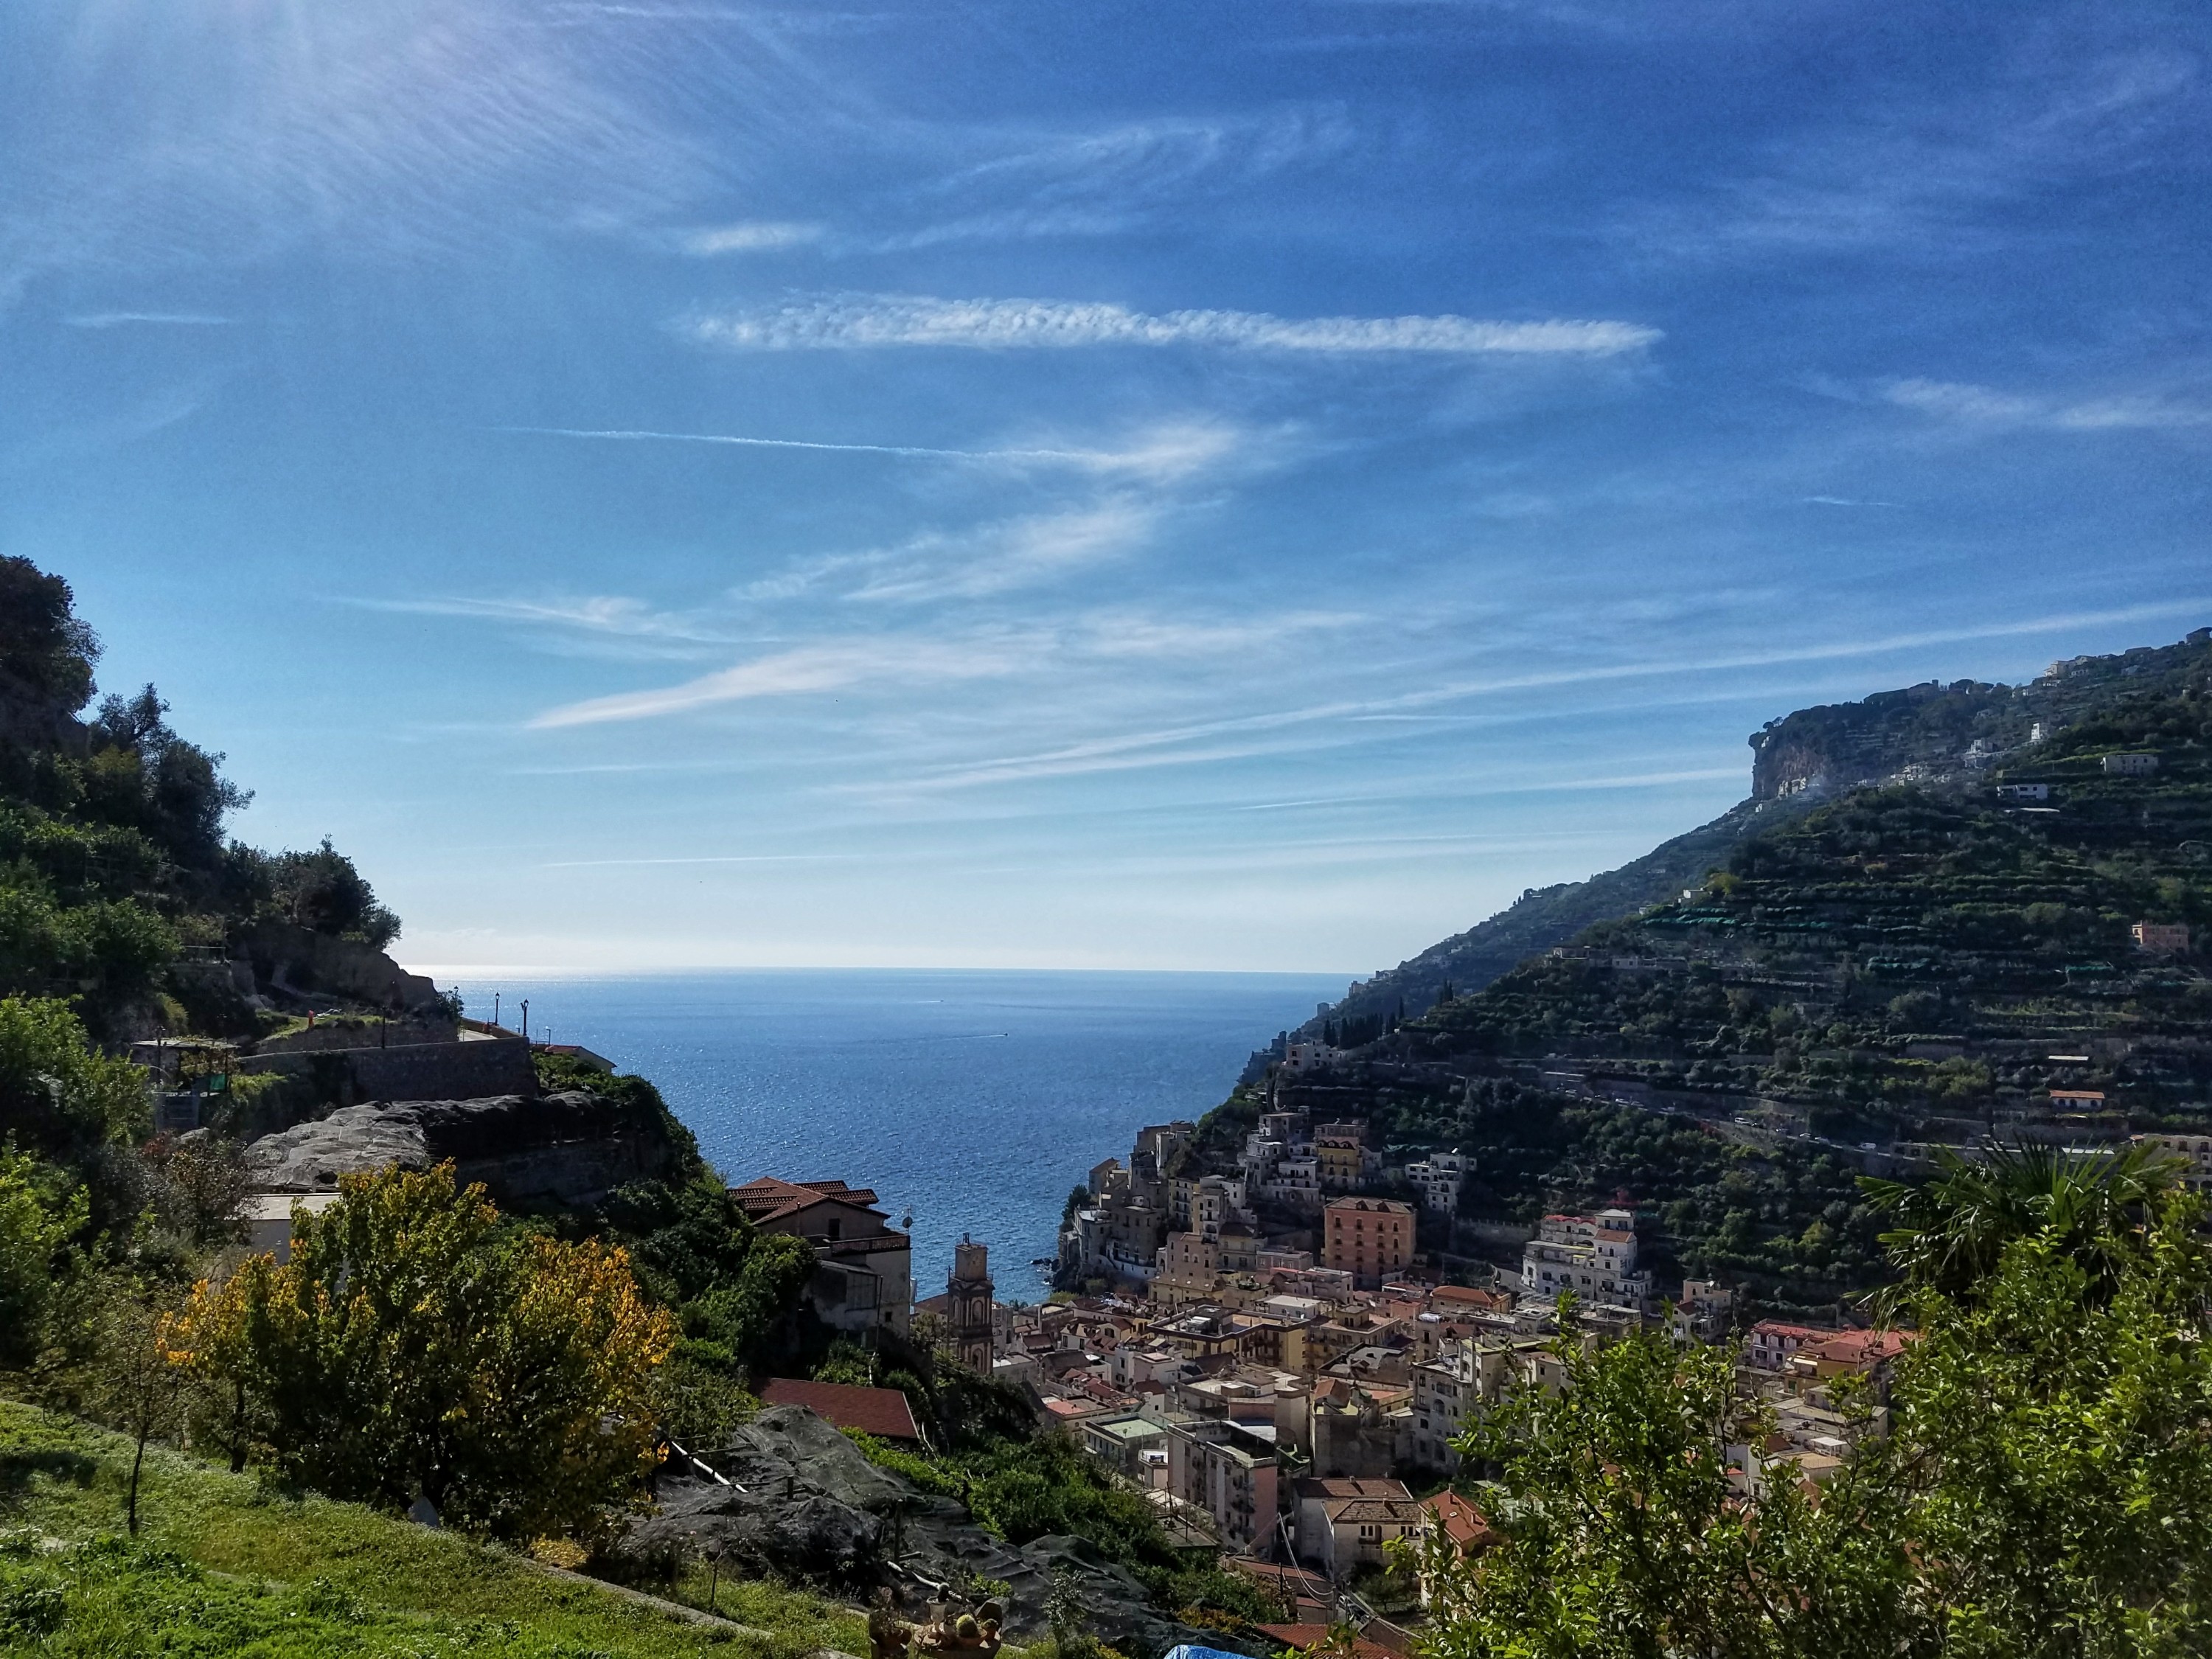 View of Minori, Italy and the Mediterranean Sea from the hills
